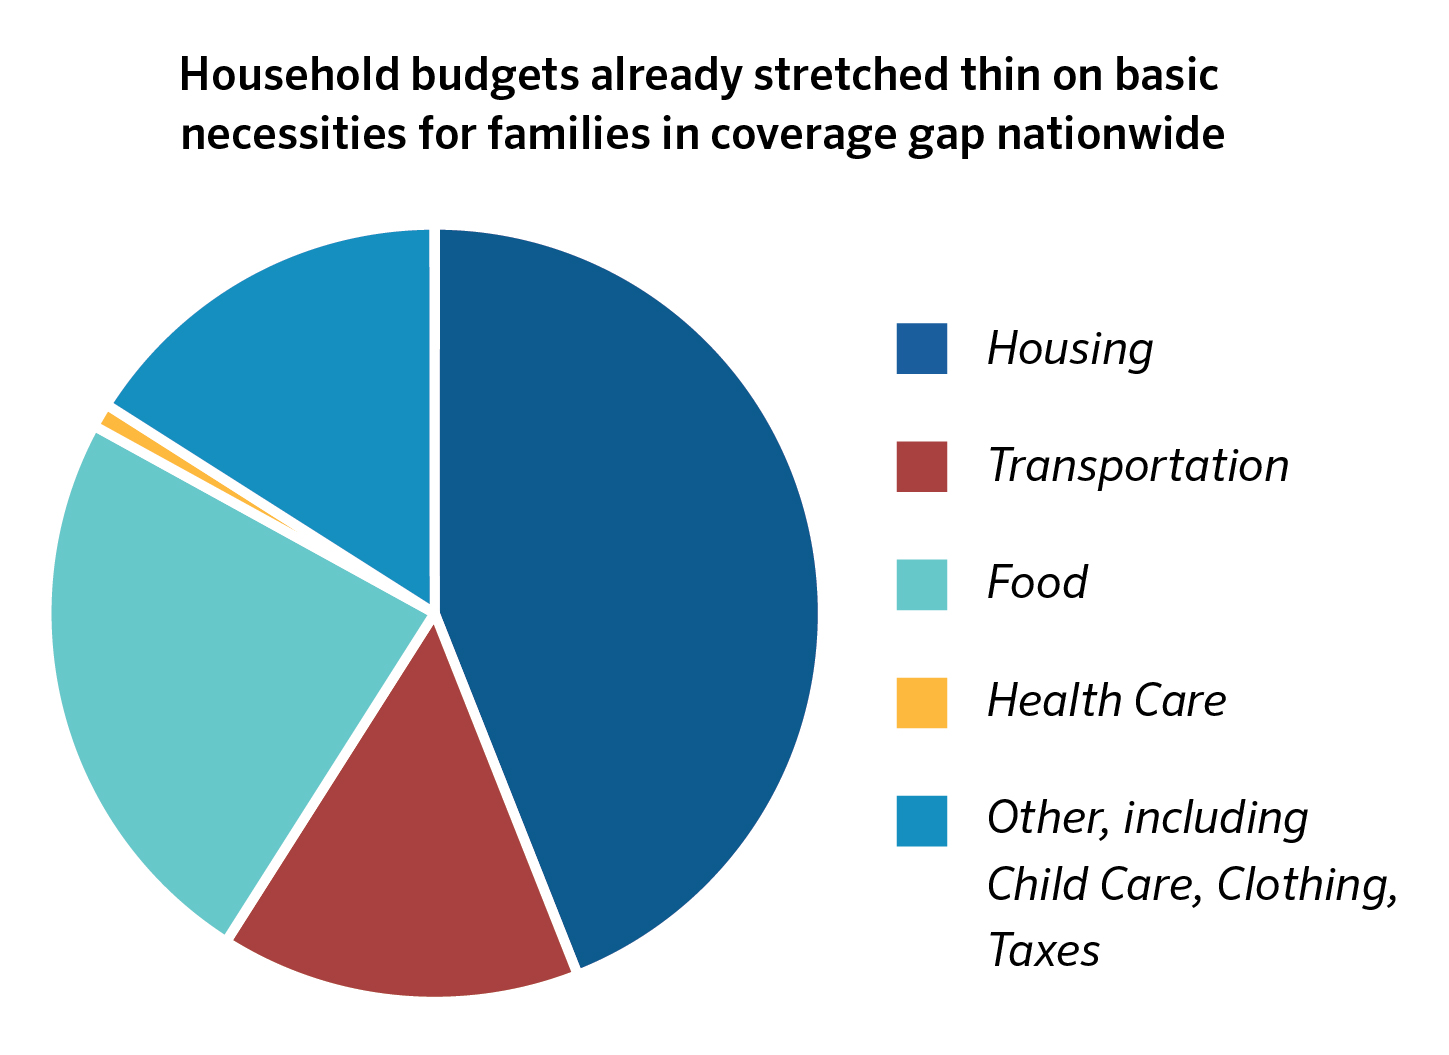 https://www.ncjustice.org/wp-content/uploads/2019/03/HAP-MedIcaid-Premiums-Household-Budgets-pie-chart.jpg